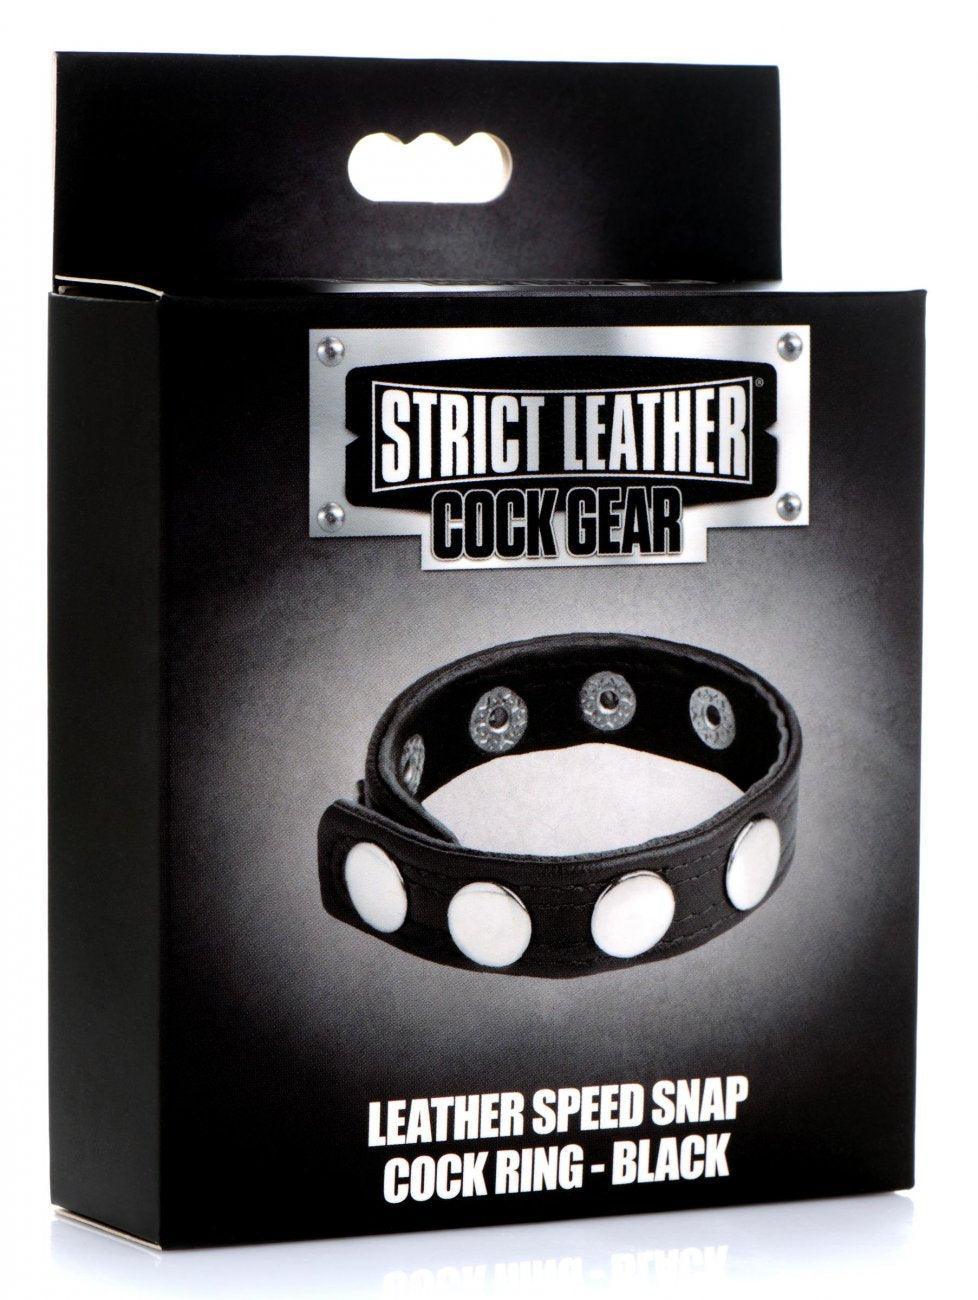 Cock Gear Leather Speed Snap Cock Ring - Black - My Sex Toy Hub